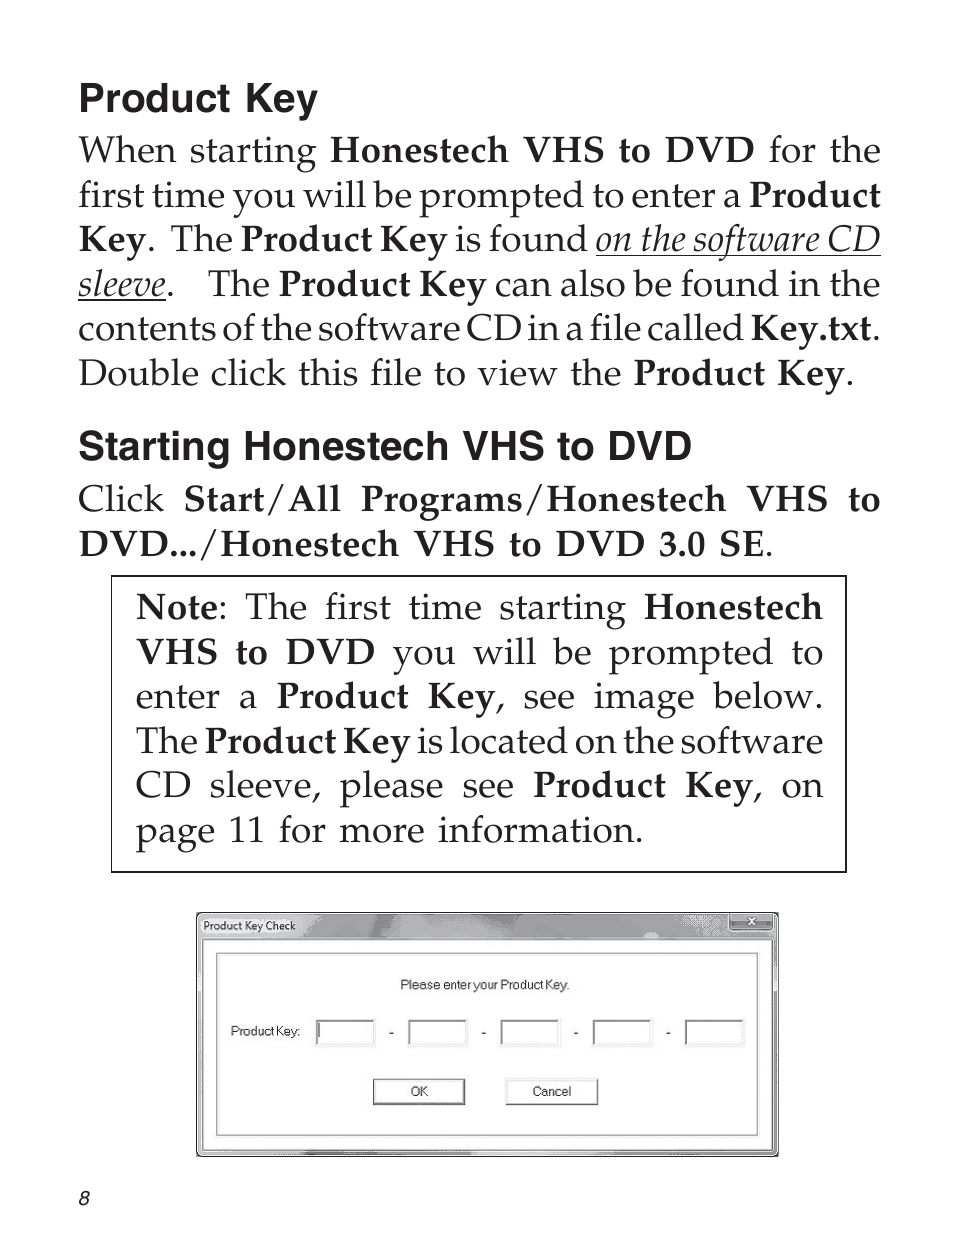 honestech vhs to dvd 3.0 lost product key